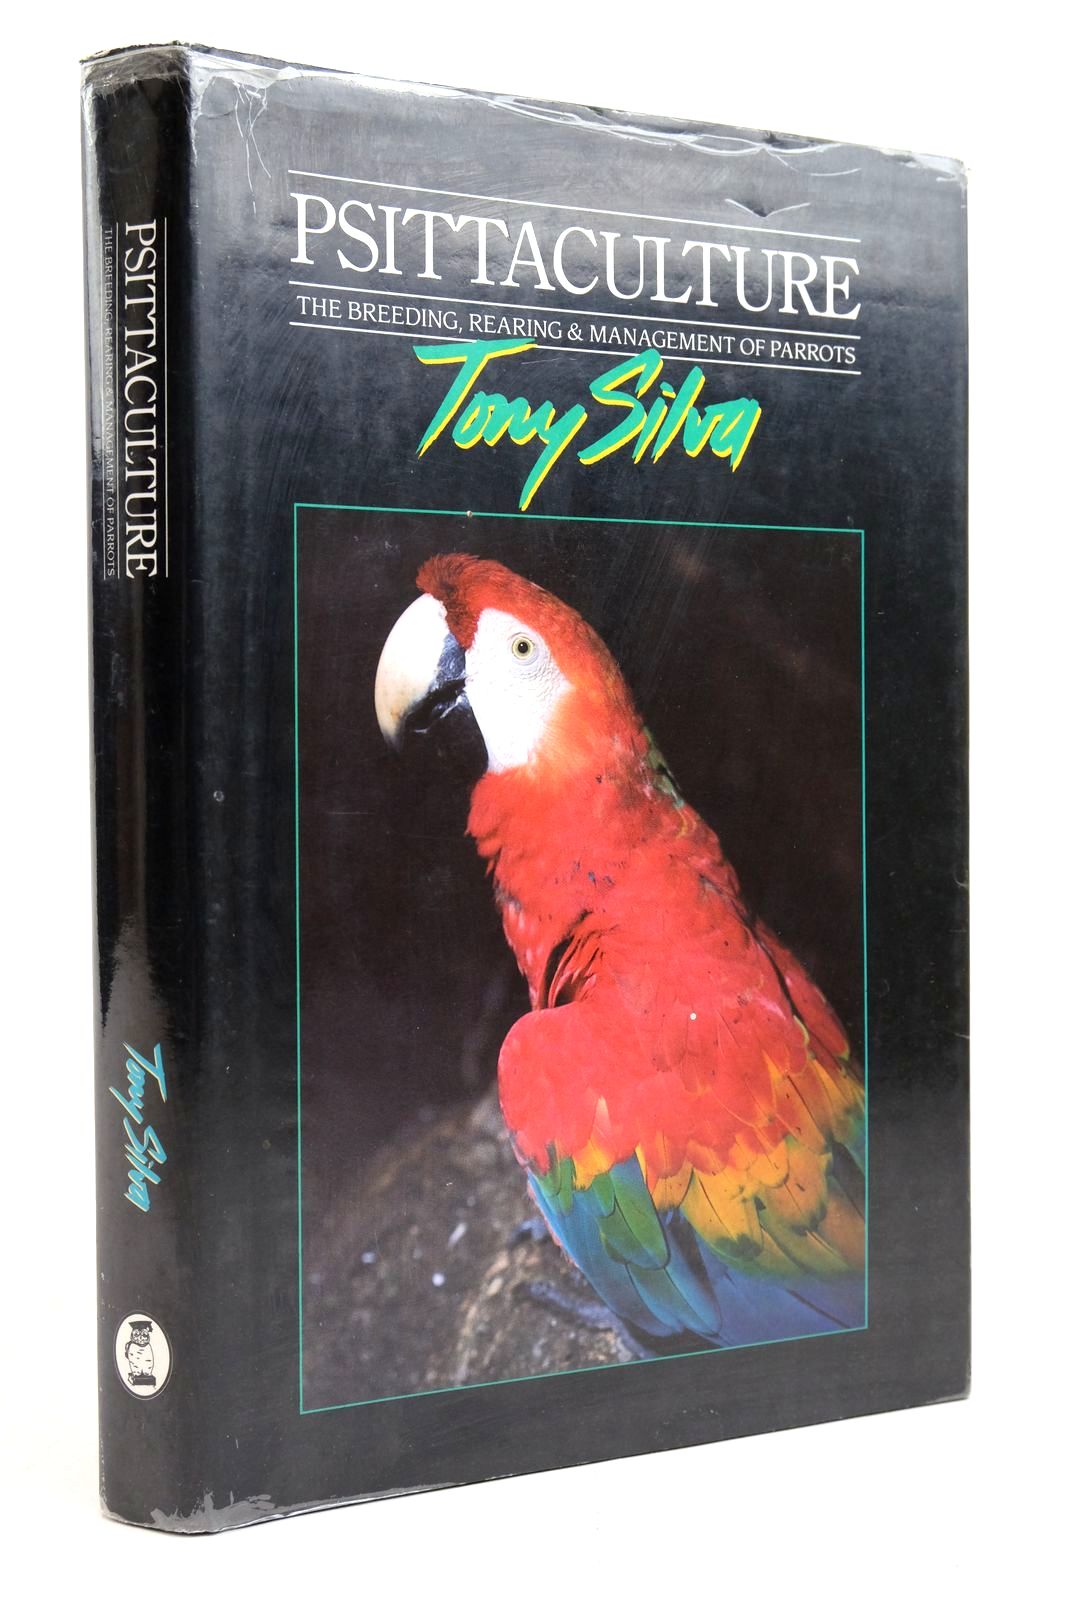 Photo of PSITTACULTURE: BREEDING, REARING AND MANAGEMENT OF PARROTS written by Silva, Tony published by Birdworld, Silvio Mattacchione &amp; Co (STOCK CODE: 2135330)  for sale by Stella & Rose's Books